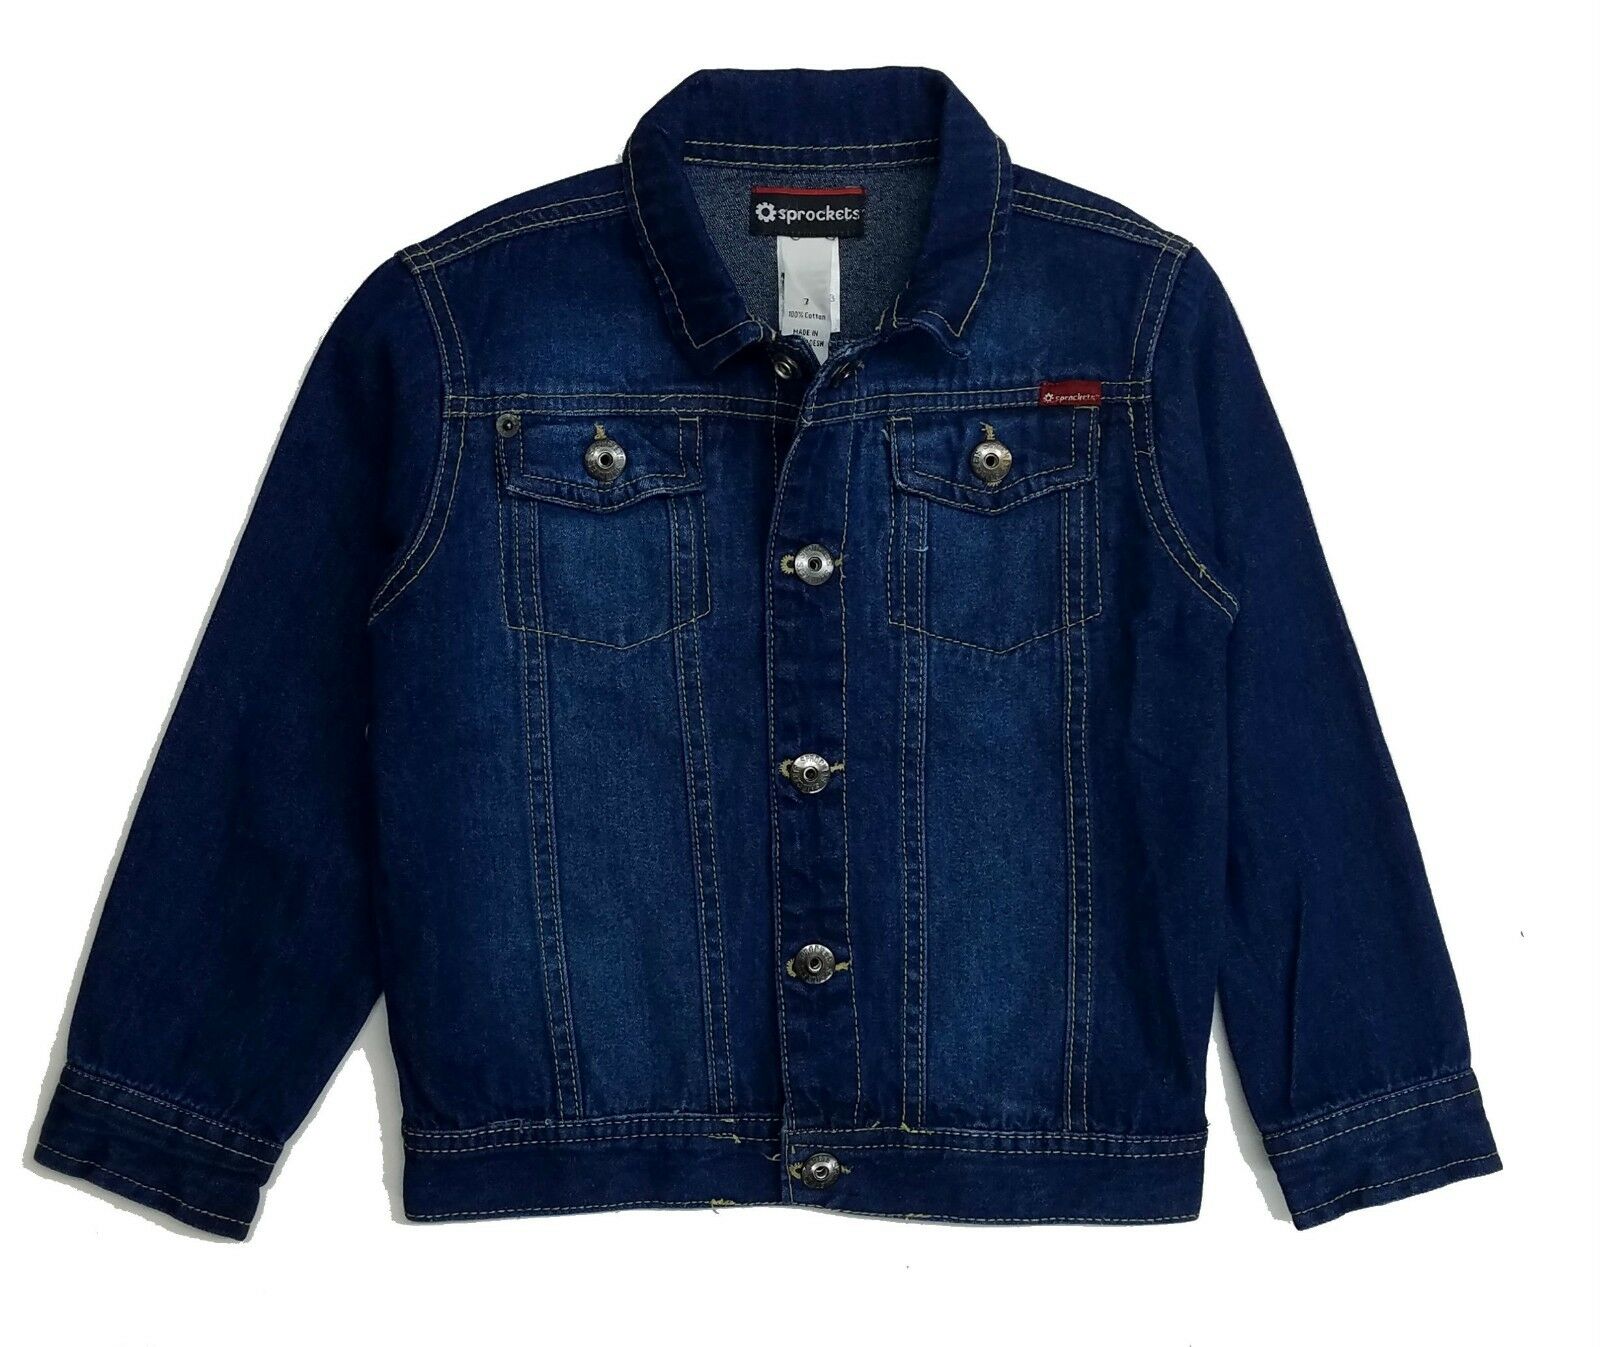 Denim Jacket Boys Baby Toddler Kids Jeans Outwear Coat Clothes 12 Months - 7 nwt